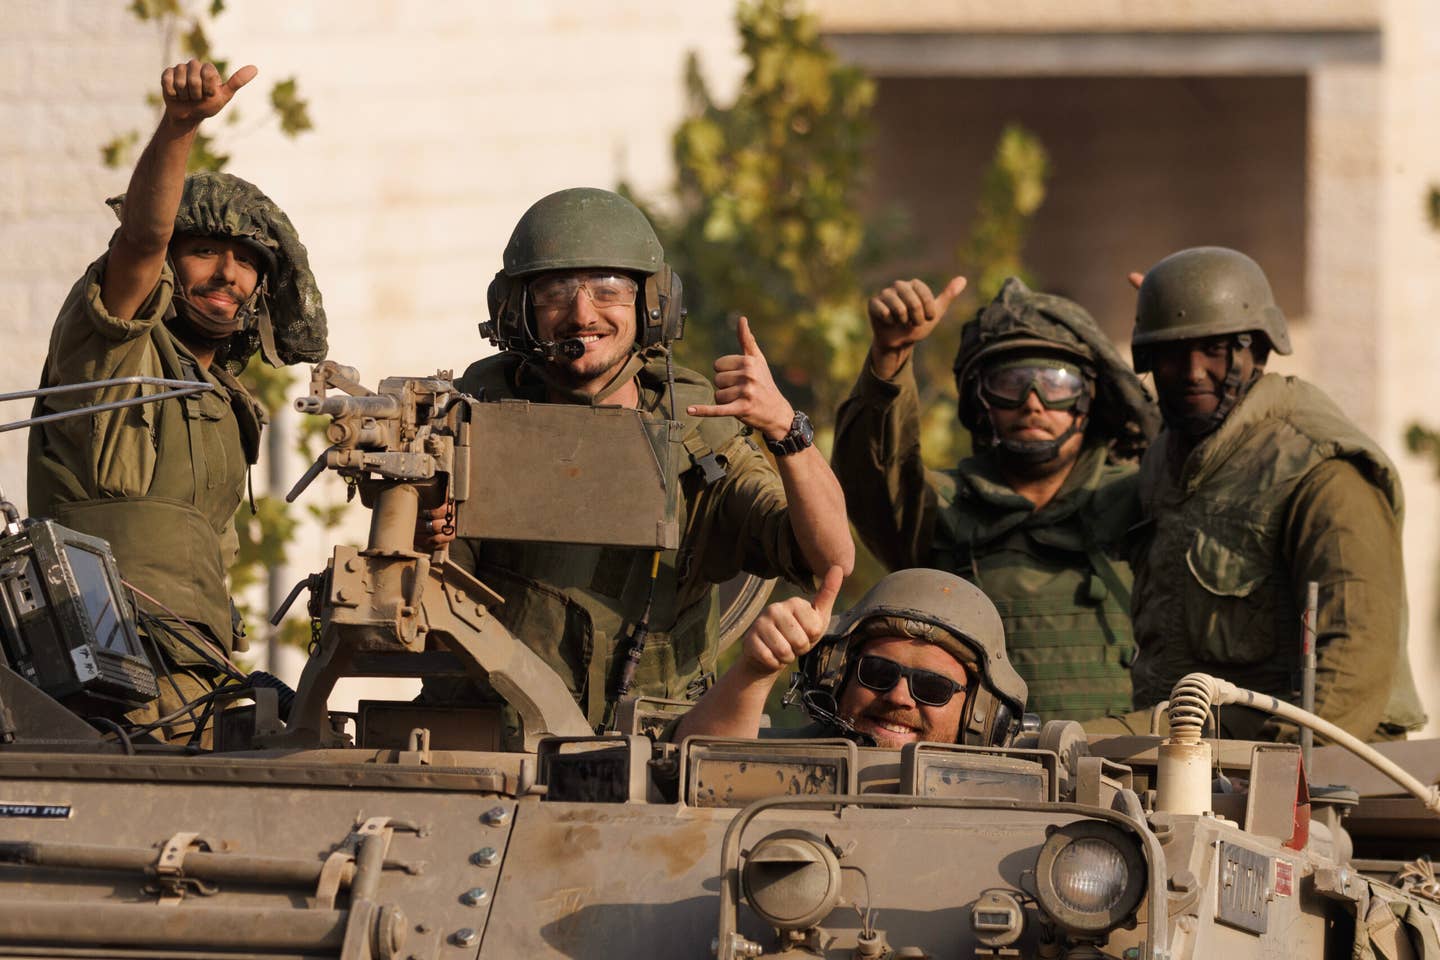 Israeli soldiers give a thumbs-up gesture as Israeli troops move near the border with Gaza on October 28, 2023, in Sderot, Israel. <em>Photo by Dan Kitwood/Getty Images</em>